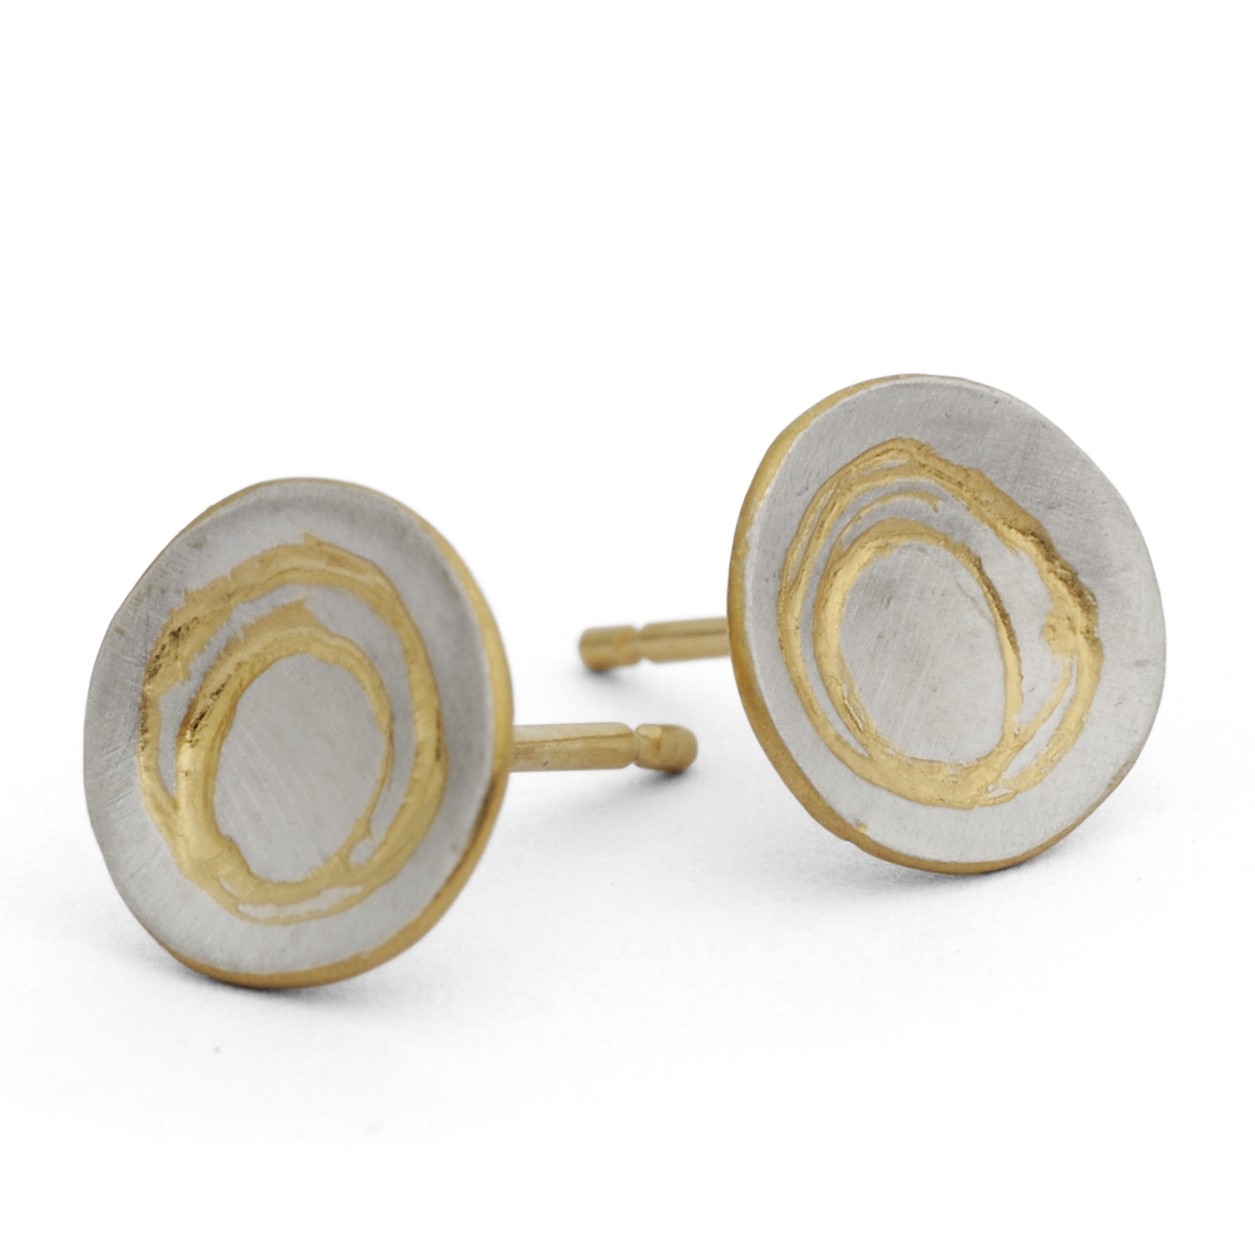 Spiral etched silver earrings | Contemporary Earrings by Kate Smith ...